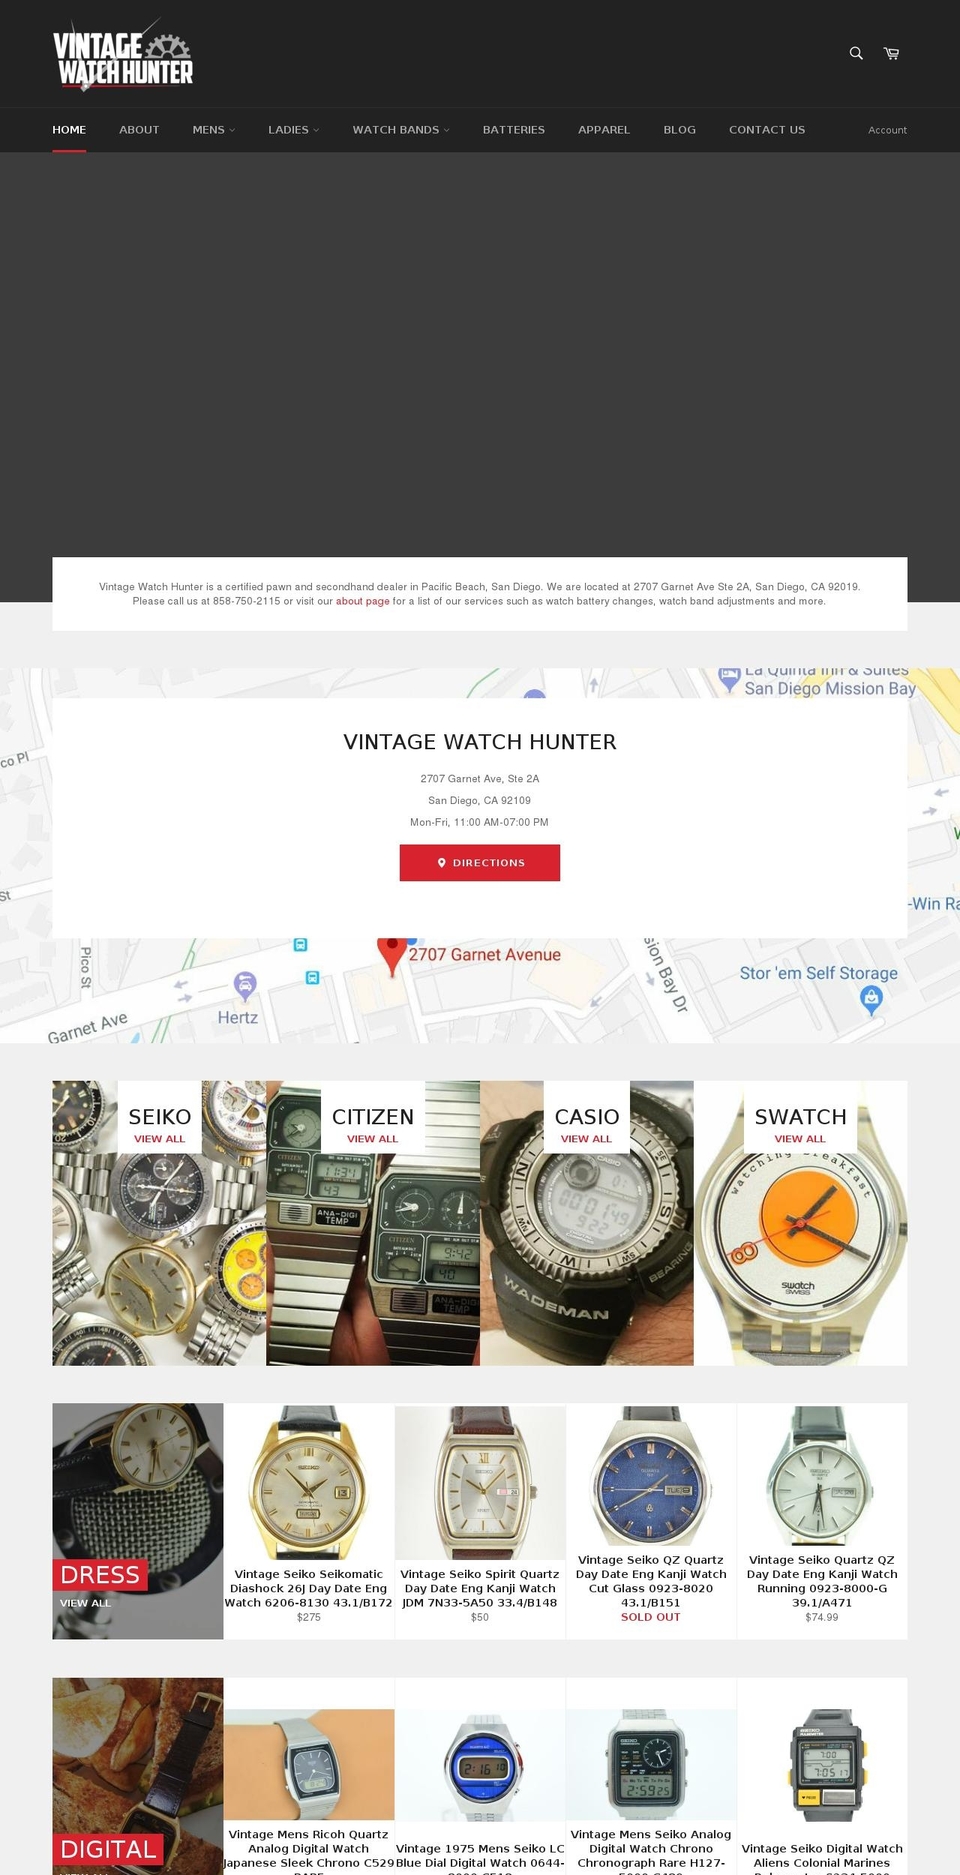 Goodwin Shopify theme site example vintagewatchhunter.com